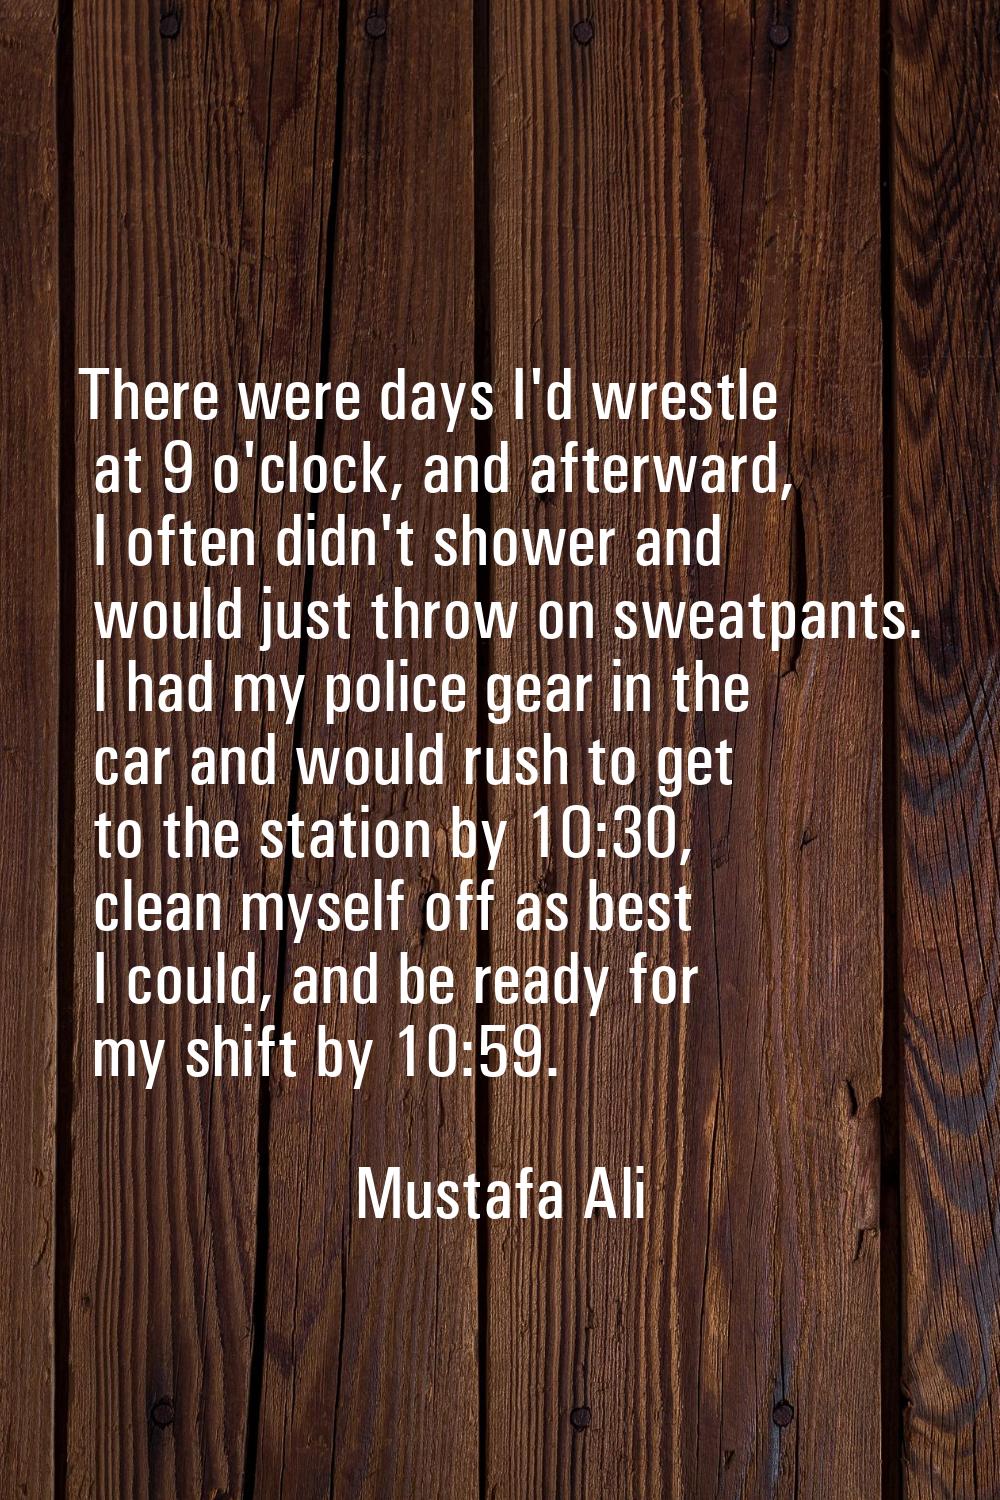 There were days I'd wrestle at 9 o'clock, and afterward, I often didn't shower and would just throw